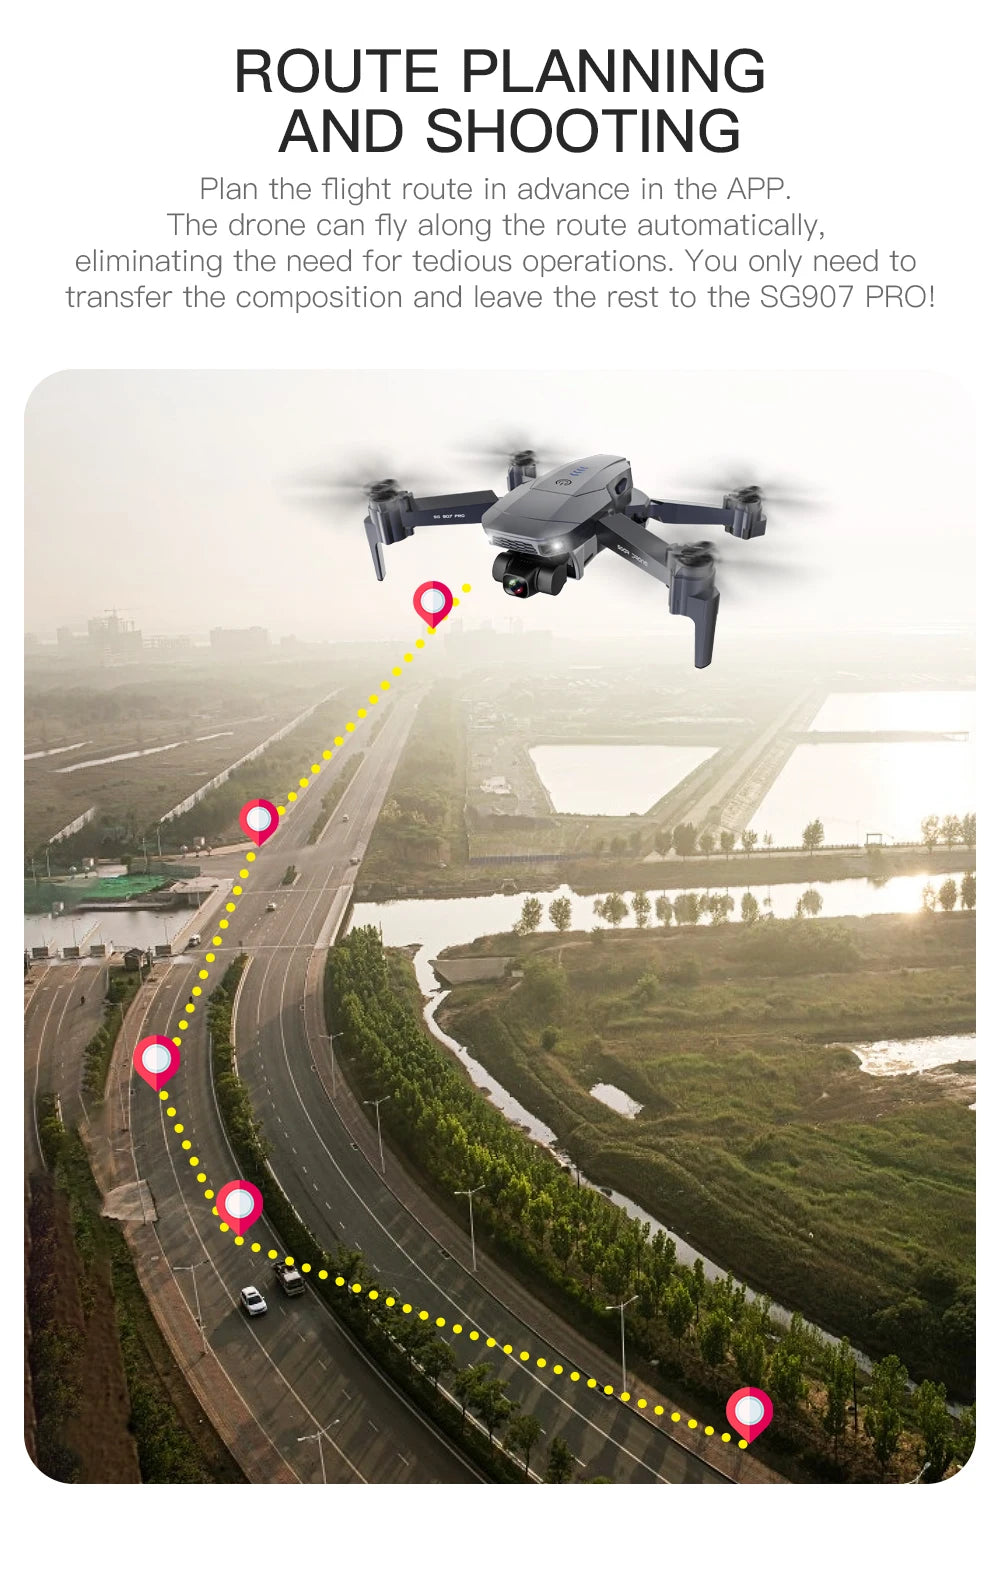 SG907 MAX Drone, the drone can fly along the route automatically, eliminating the need for tedious operations . SG